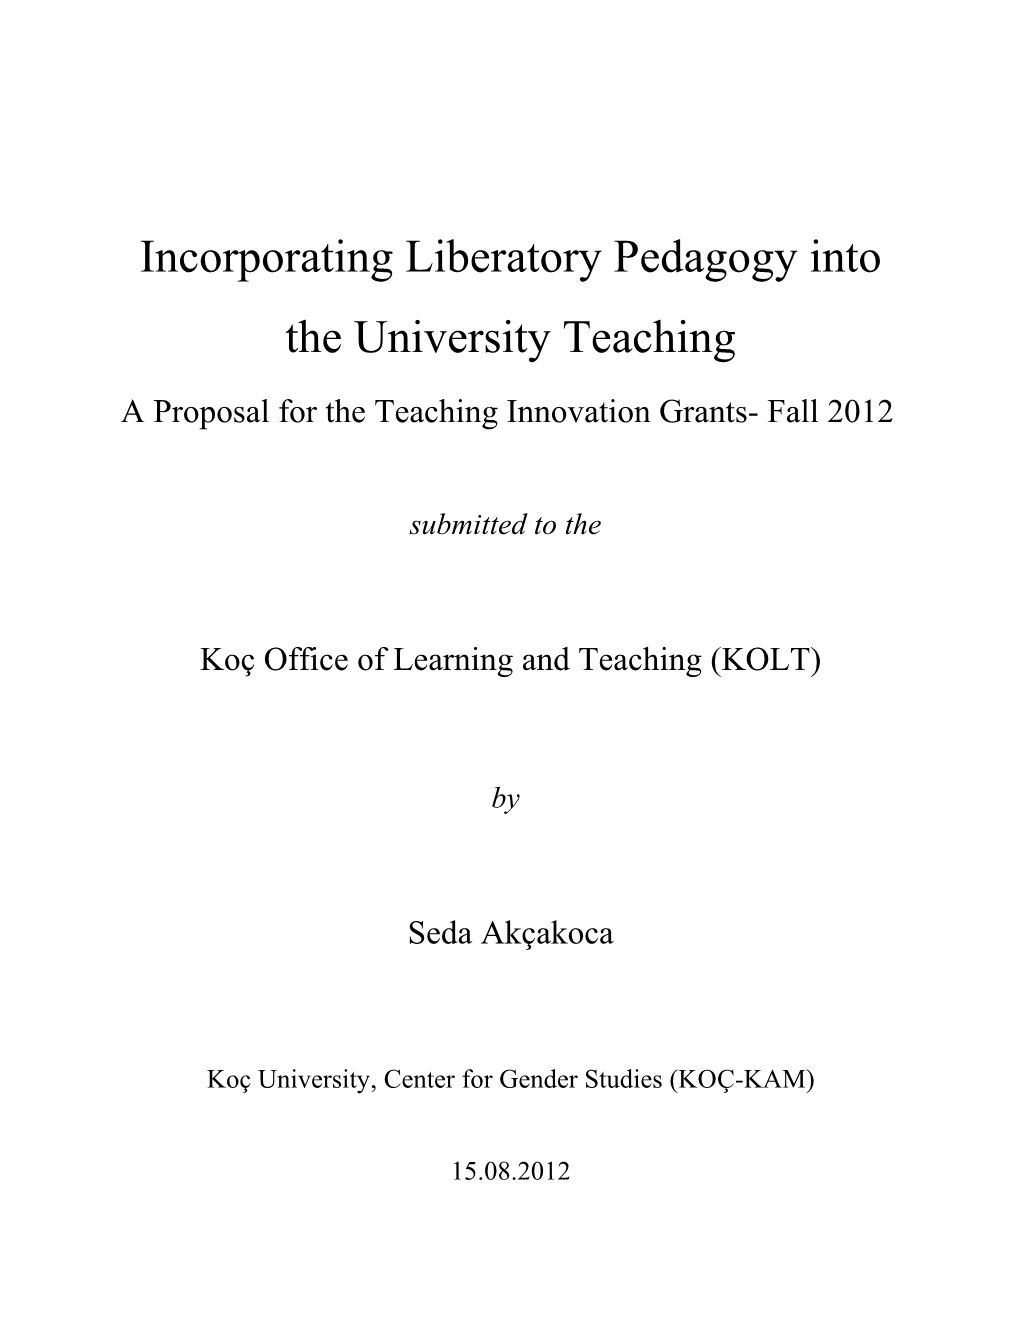 Proposal for the Teaching Innovation Grants- Fall 2012